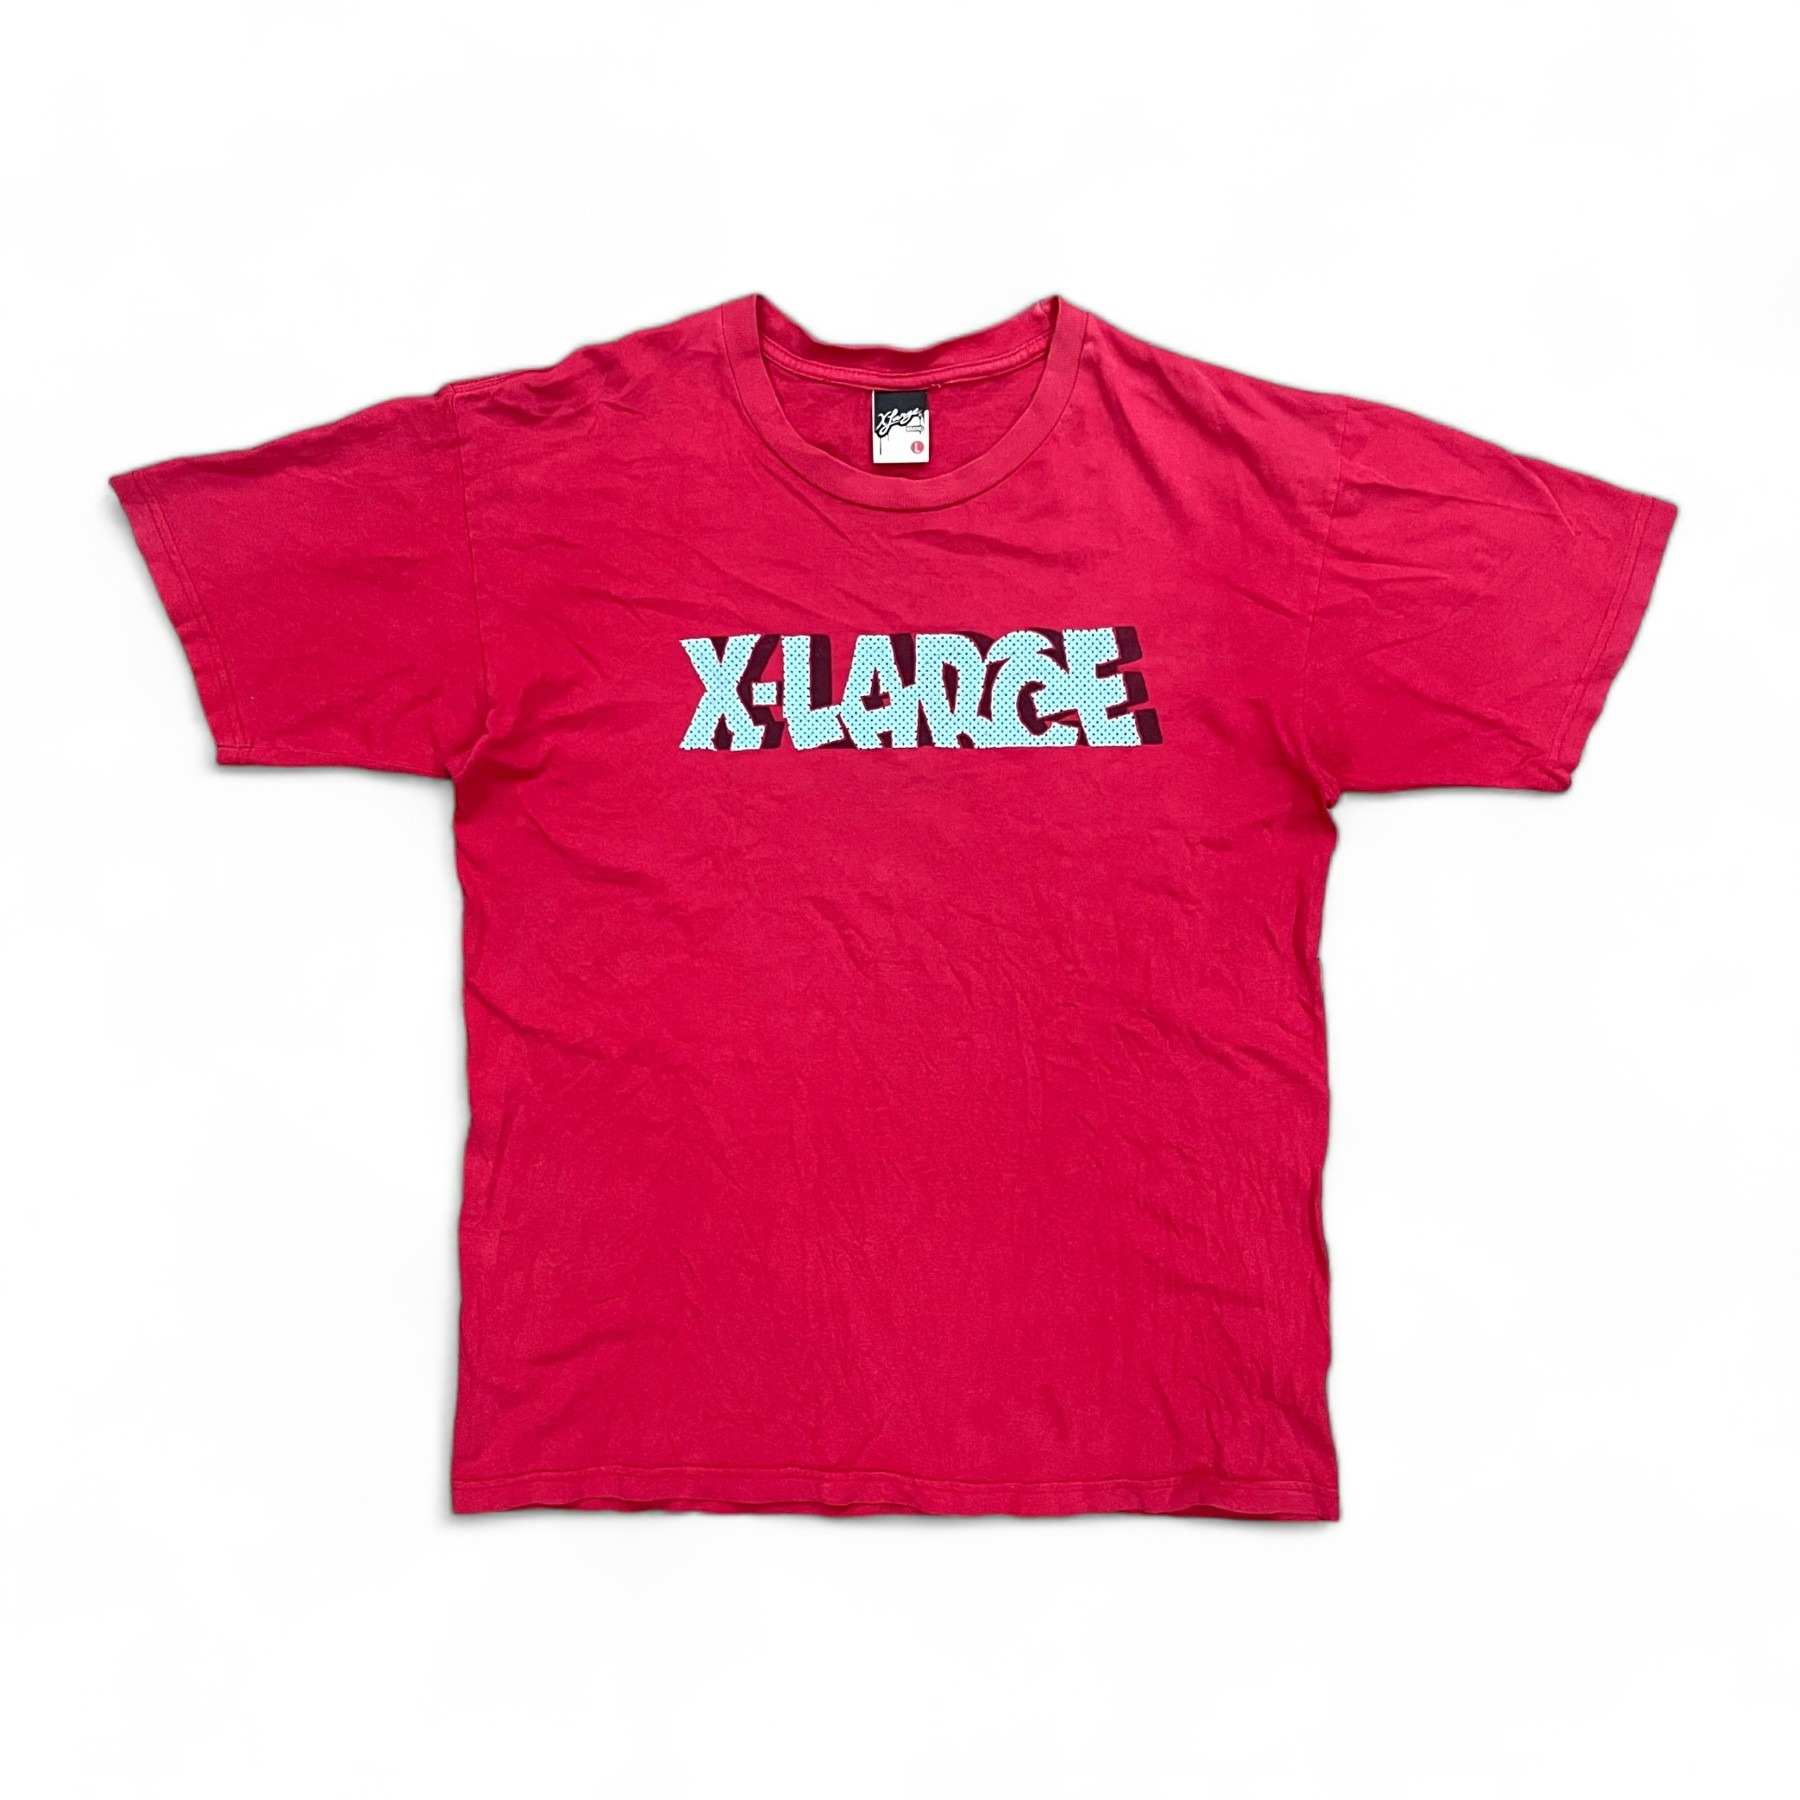 Vintage X-LARGE Tee (Made in USA) - L